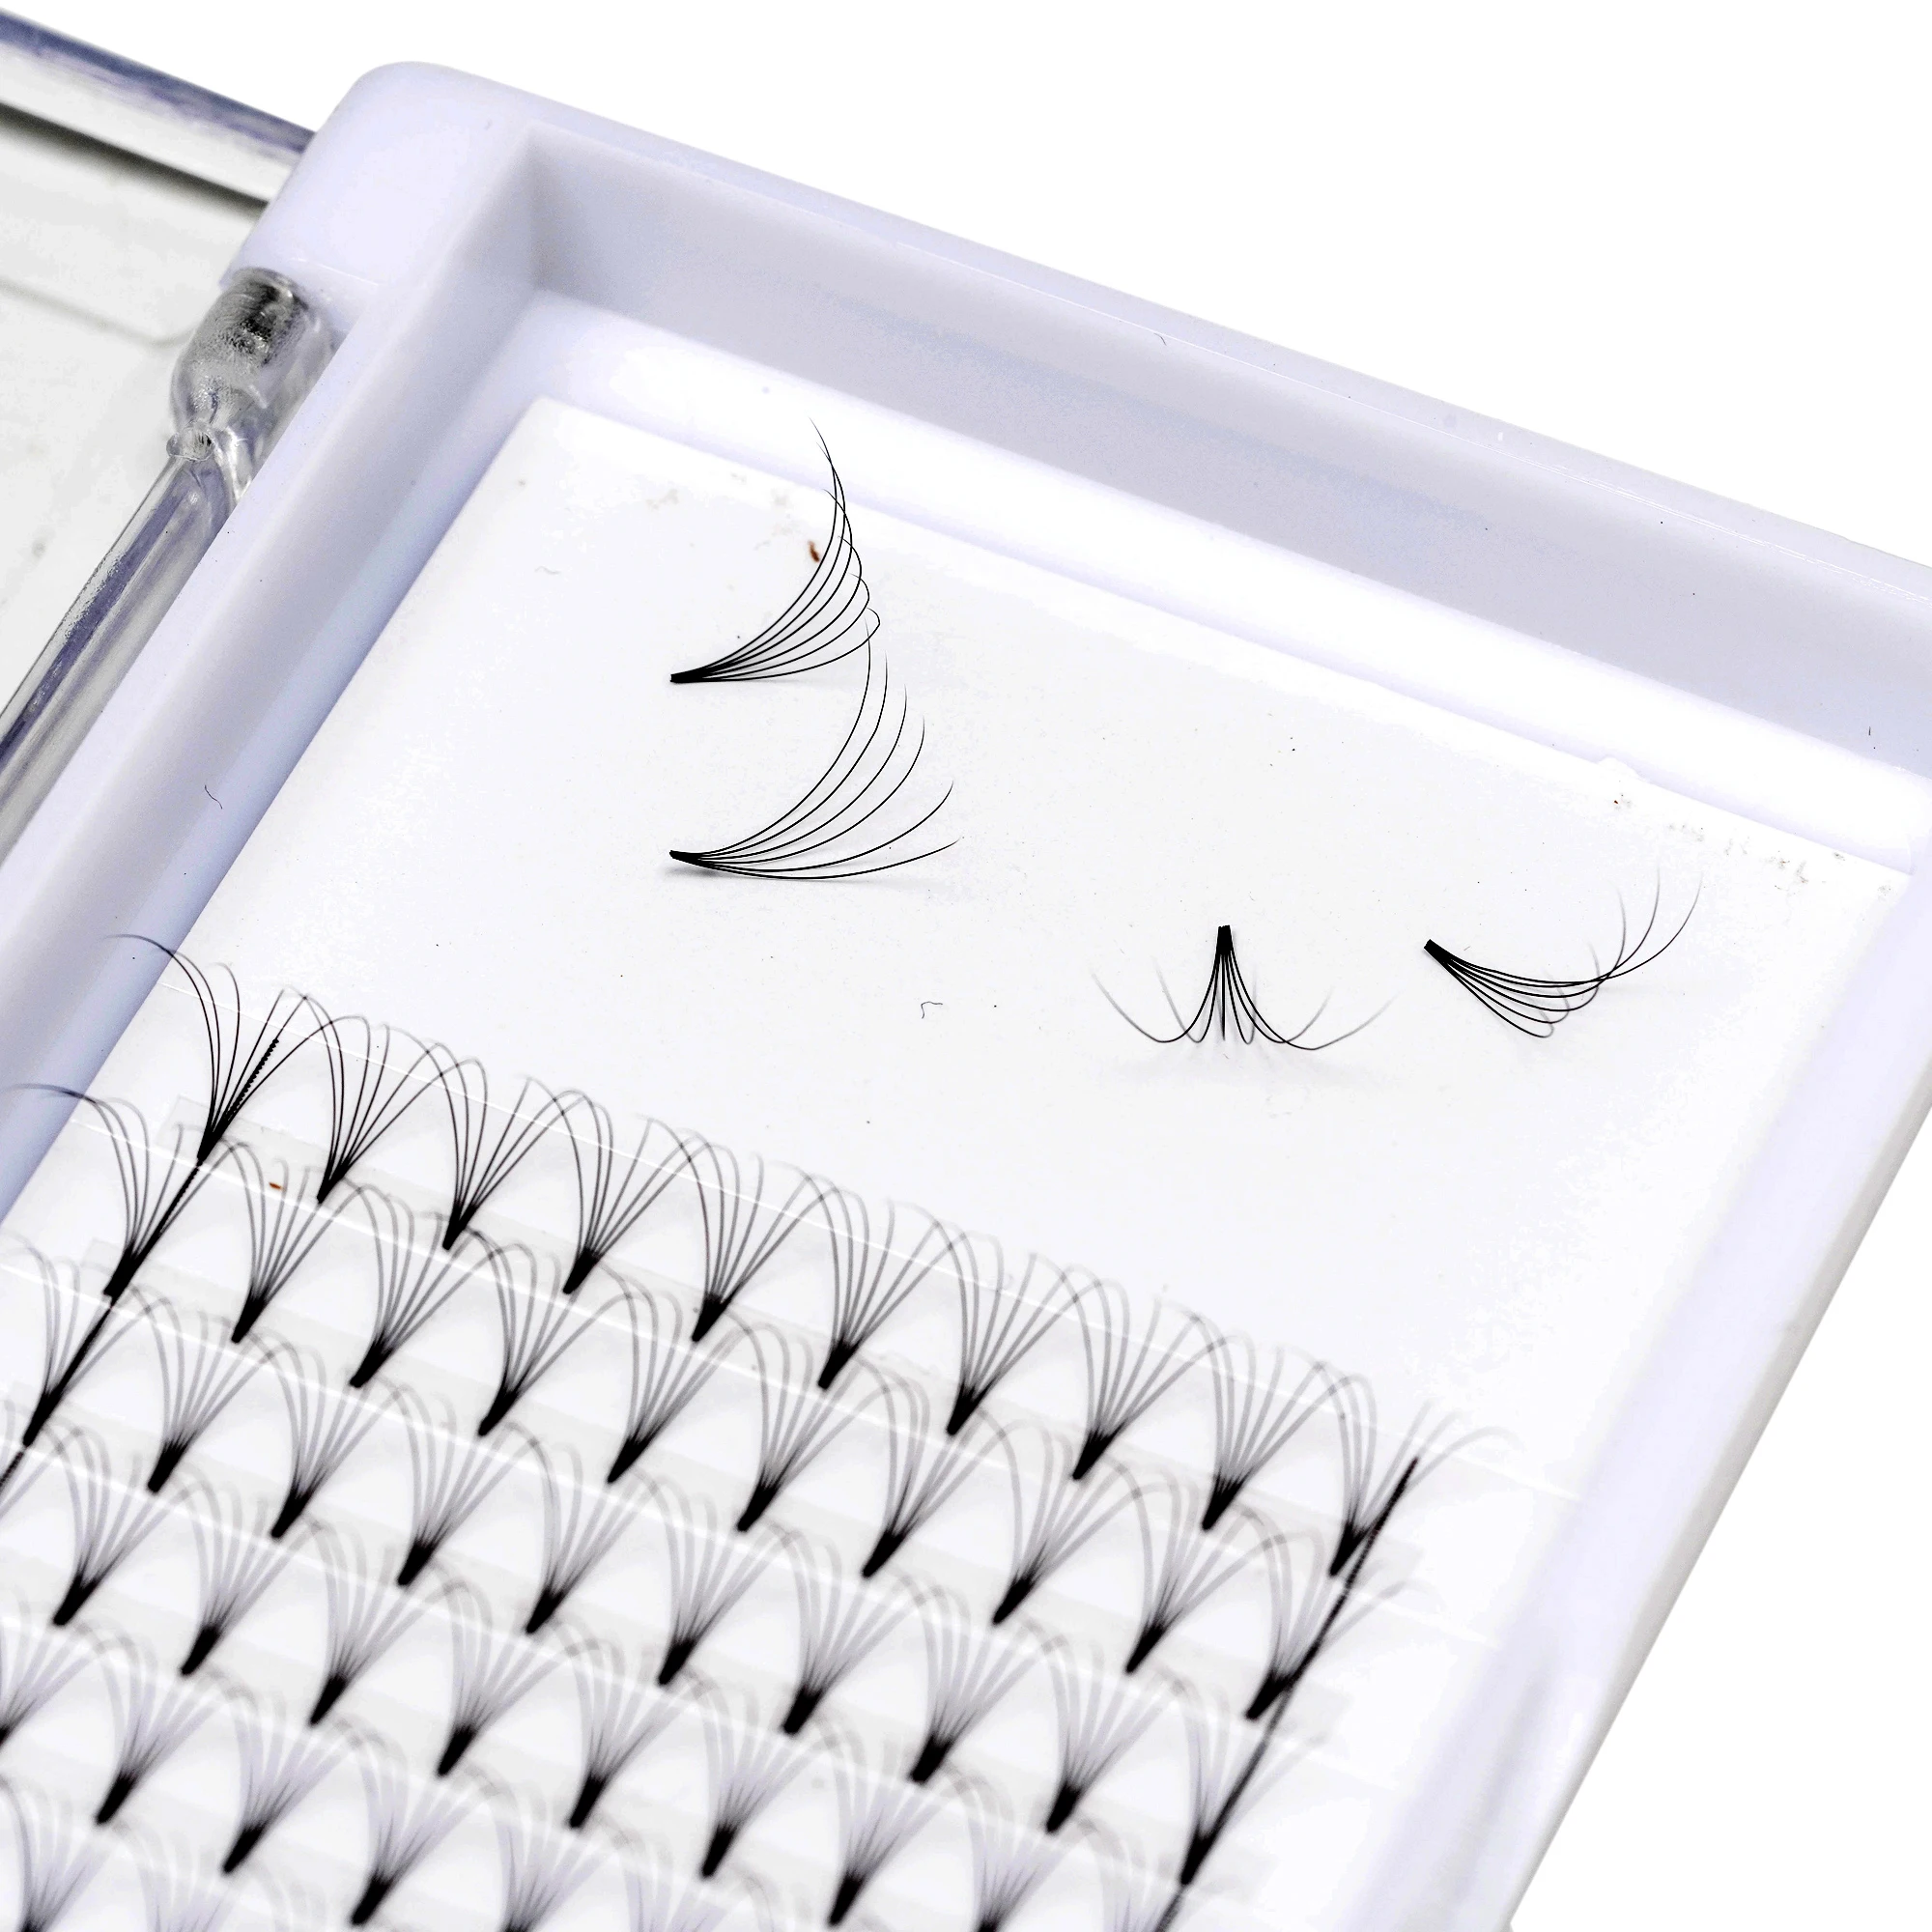 

wholesale well stocked 07 10D C D curl short stem pointy base loose premade volume fans eyelash extension with XL trays, Natural black